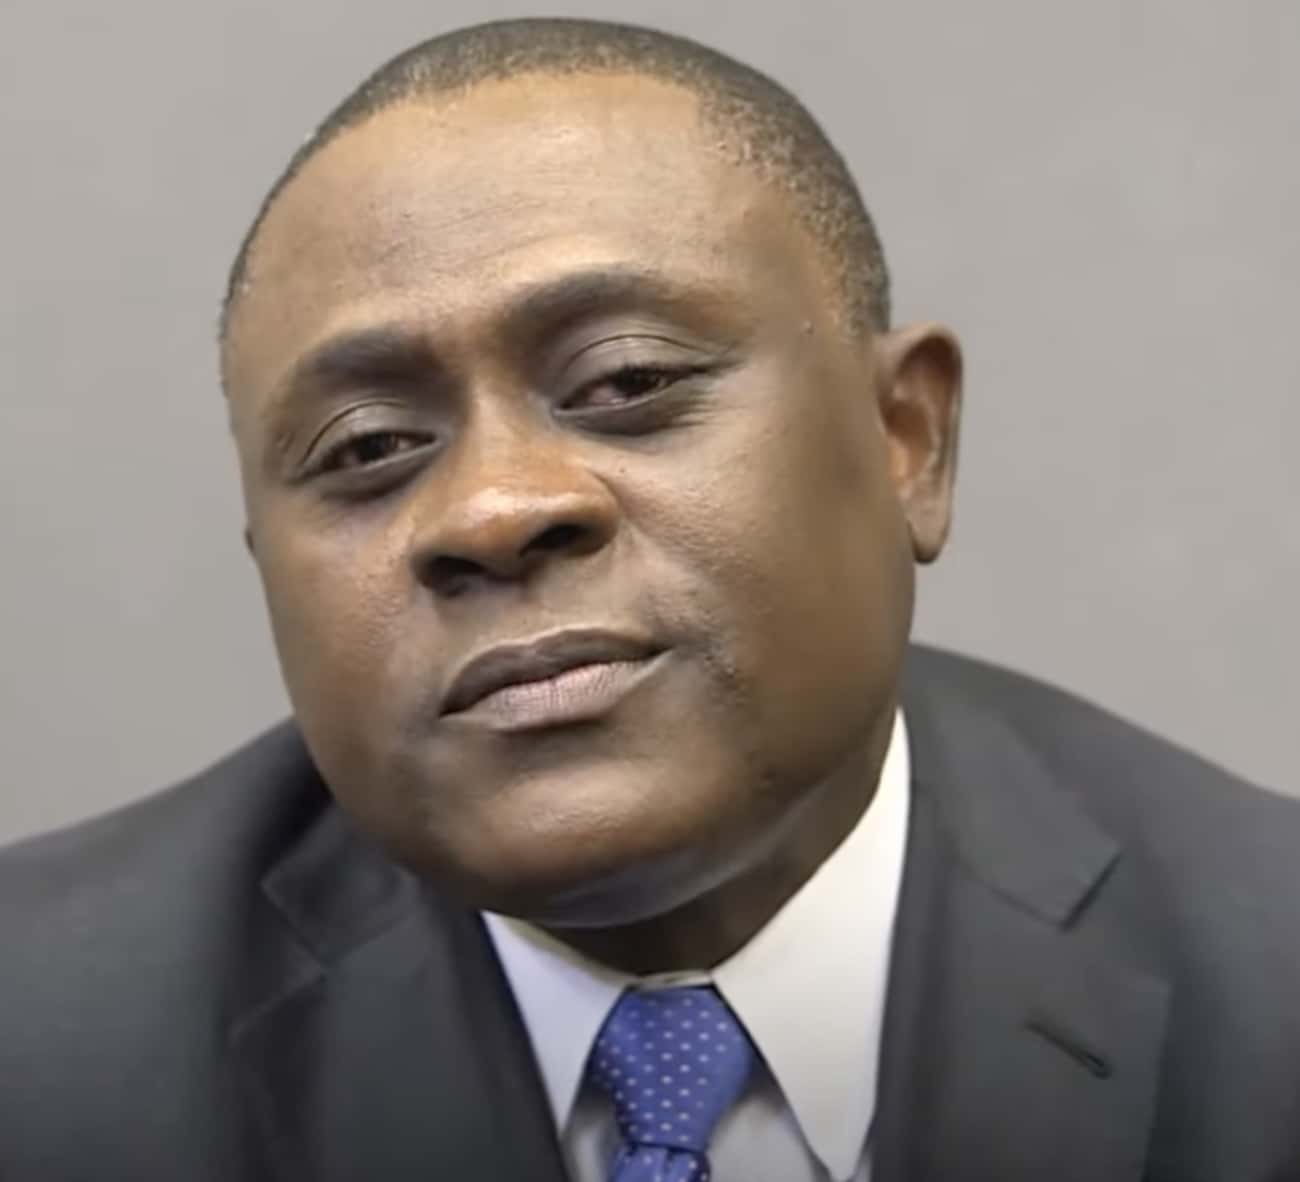 Dr. Bennet Omalu Discovered CTE In Football Players But Had His Work Stifled By NFL-Affiliated Lawyers